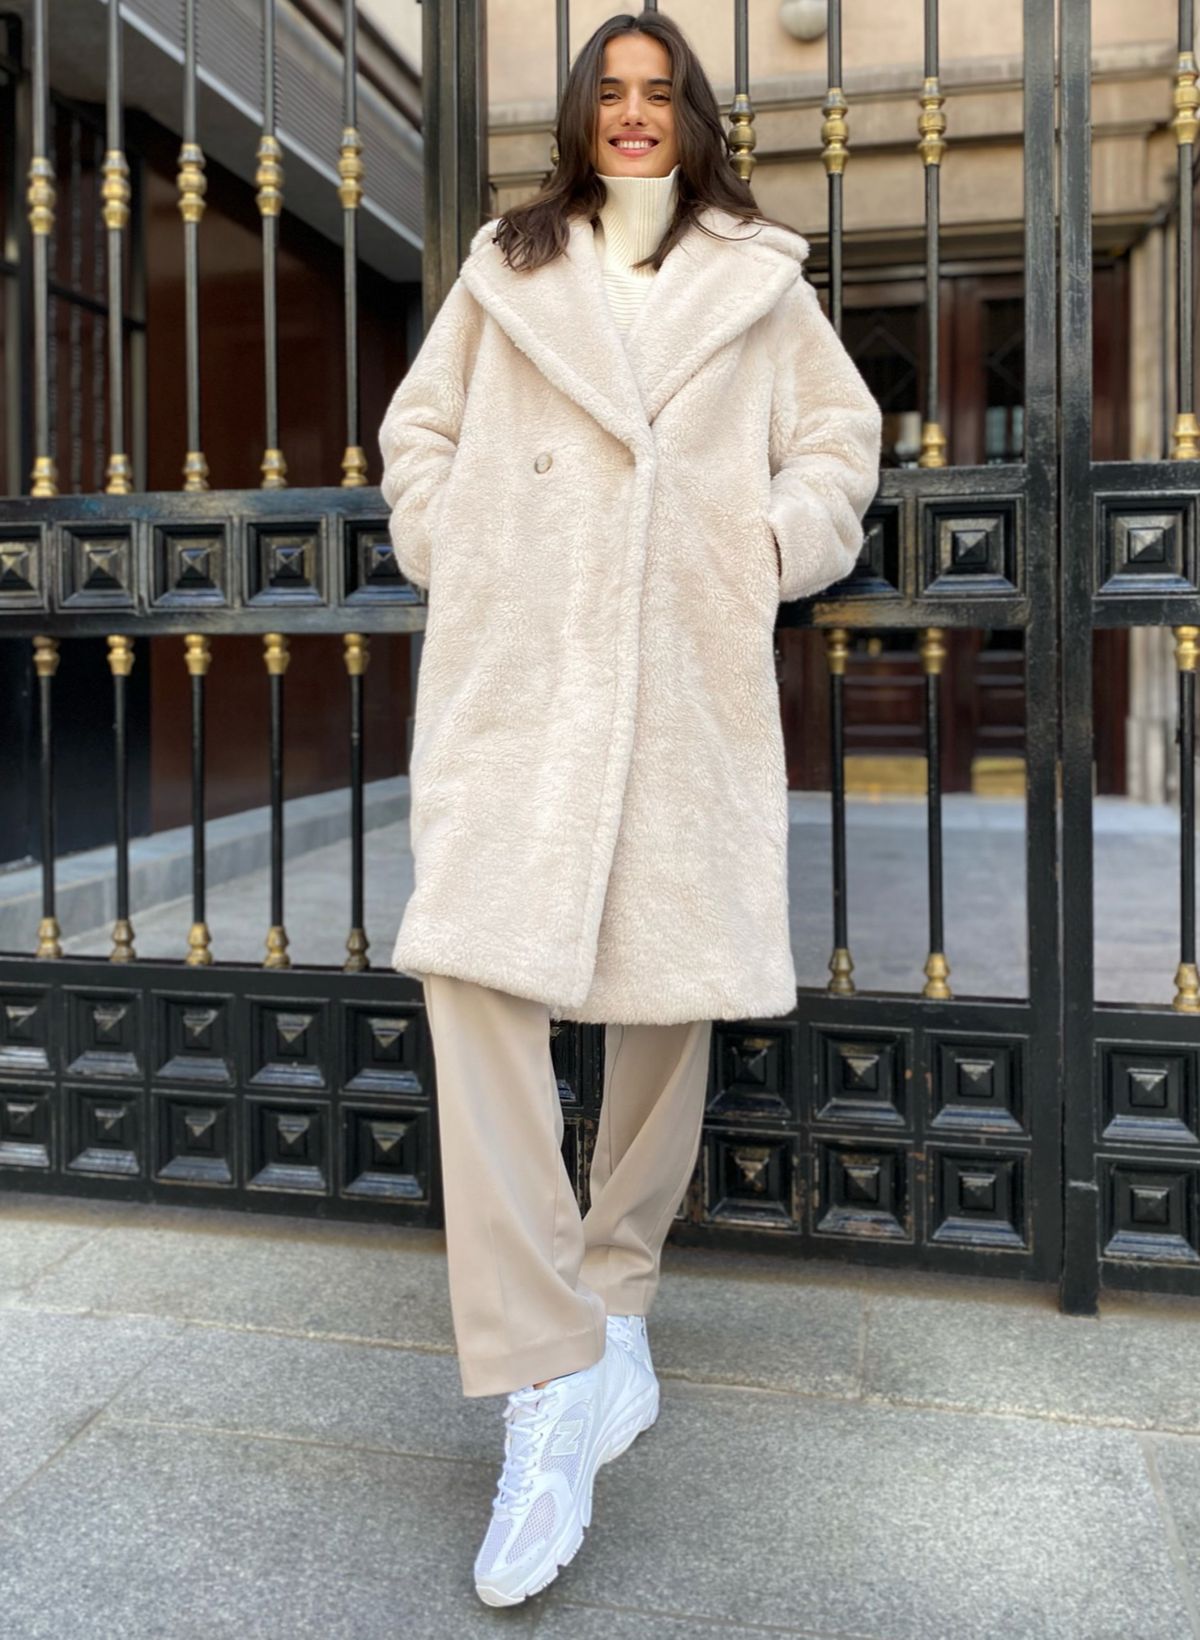 Fit Pics: Only Coat Size 1 Dark Taupe : r/Aritzia